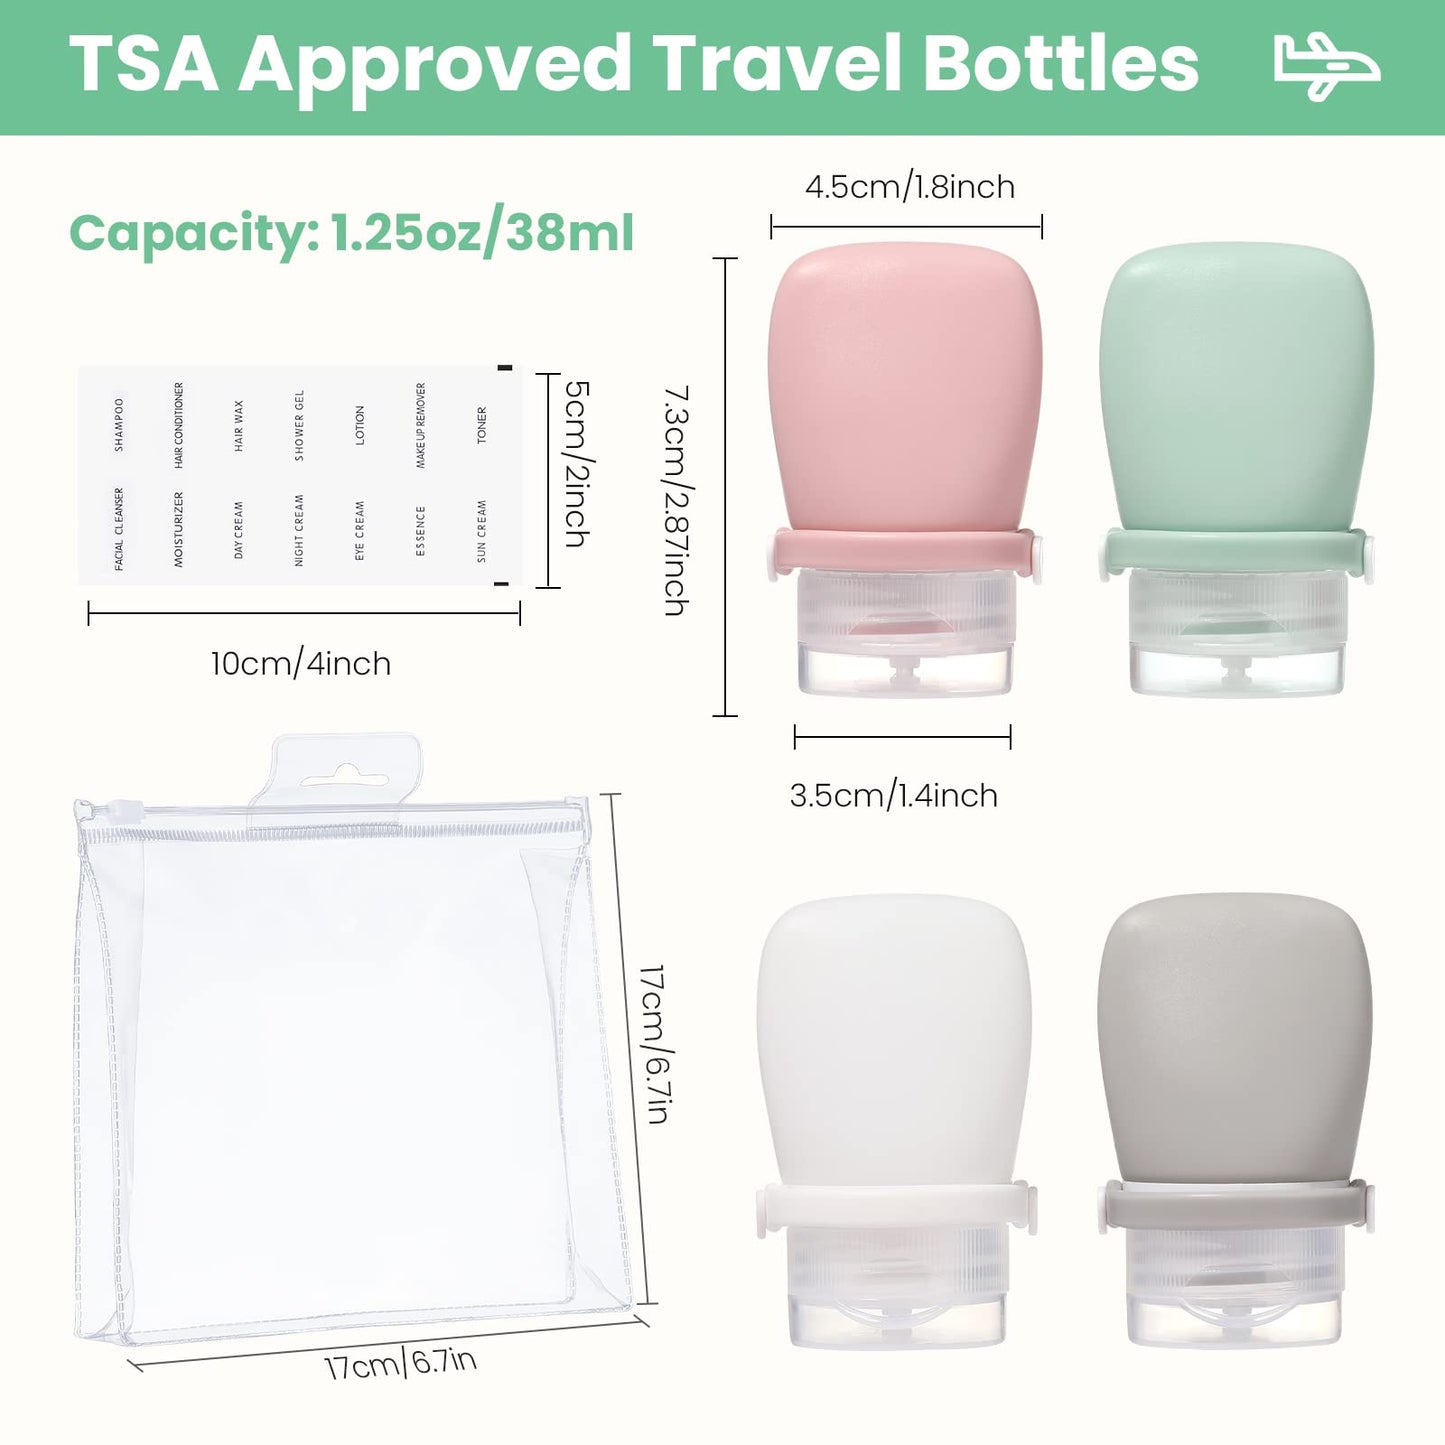 RONRONS 1oz Travel Bottles, Small Silicone Travel Bottles for Toiletries, Tsa Approved Leak Proof Strap Travel Toiletry Containers for Shampoo Conditioner for Men Women (4 Pieces)